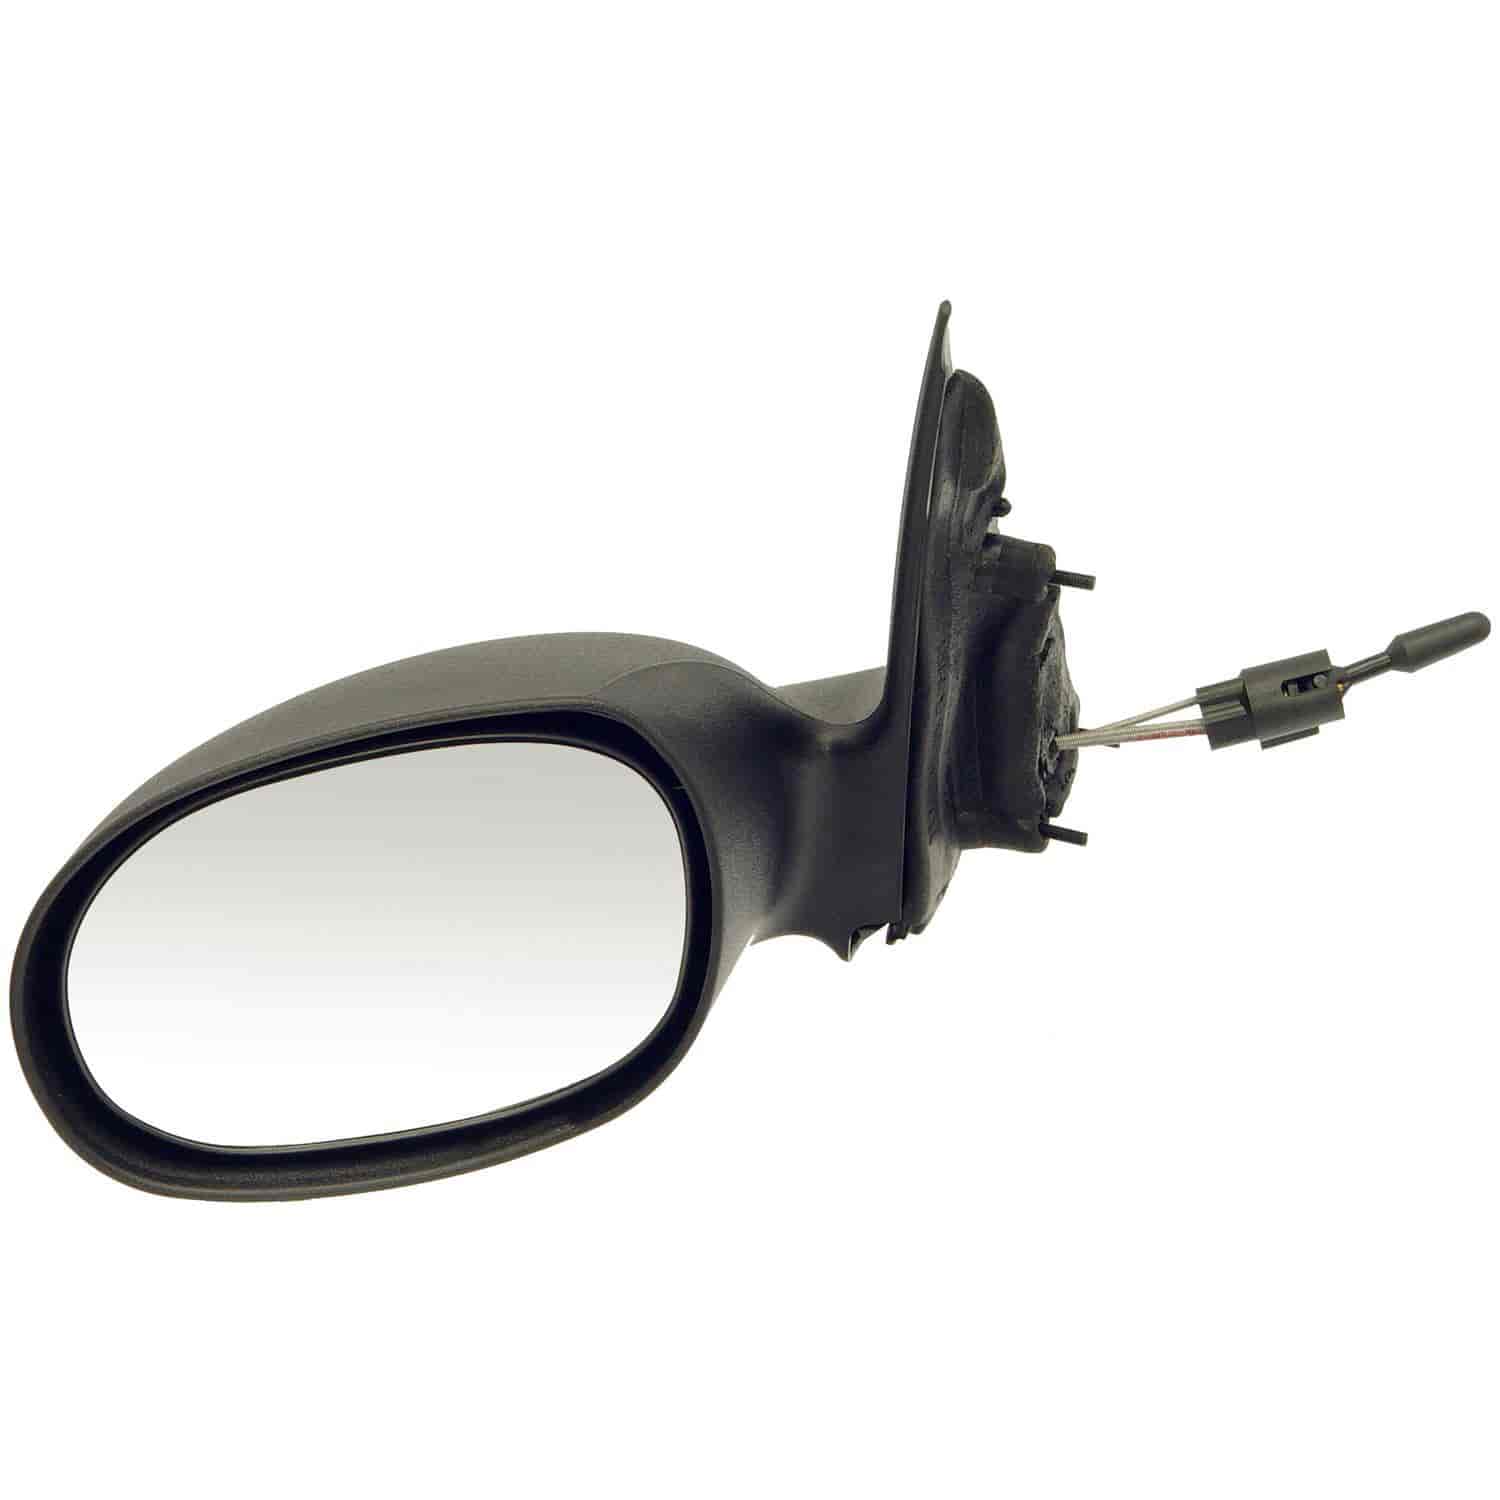 Side View Mirror Manual Remote